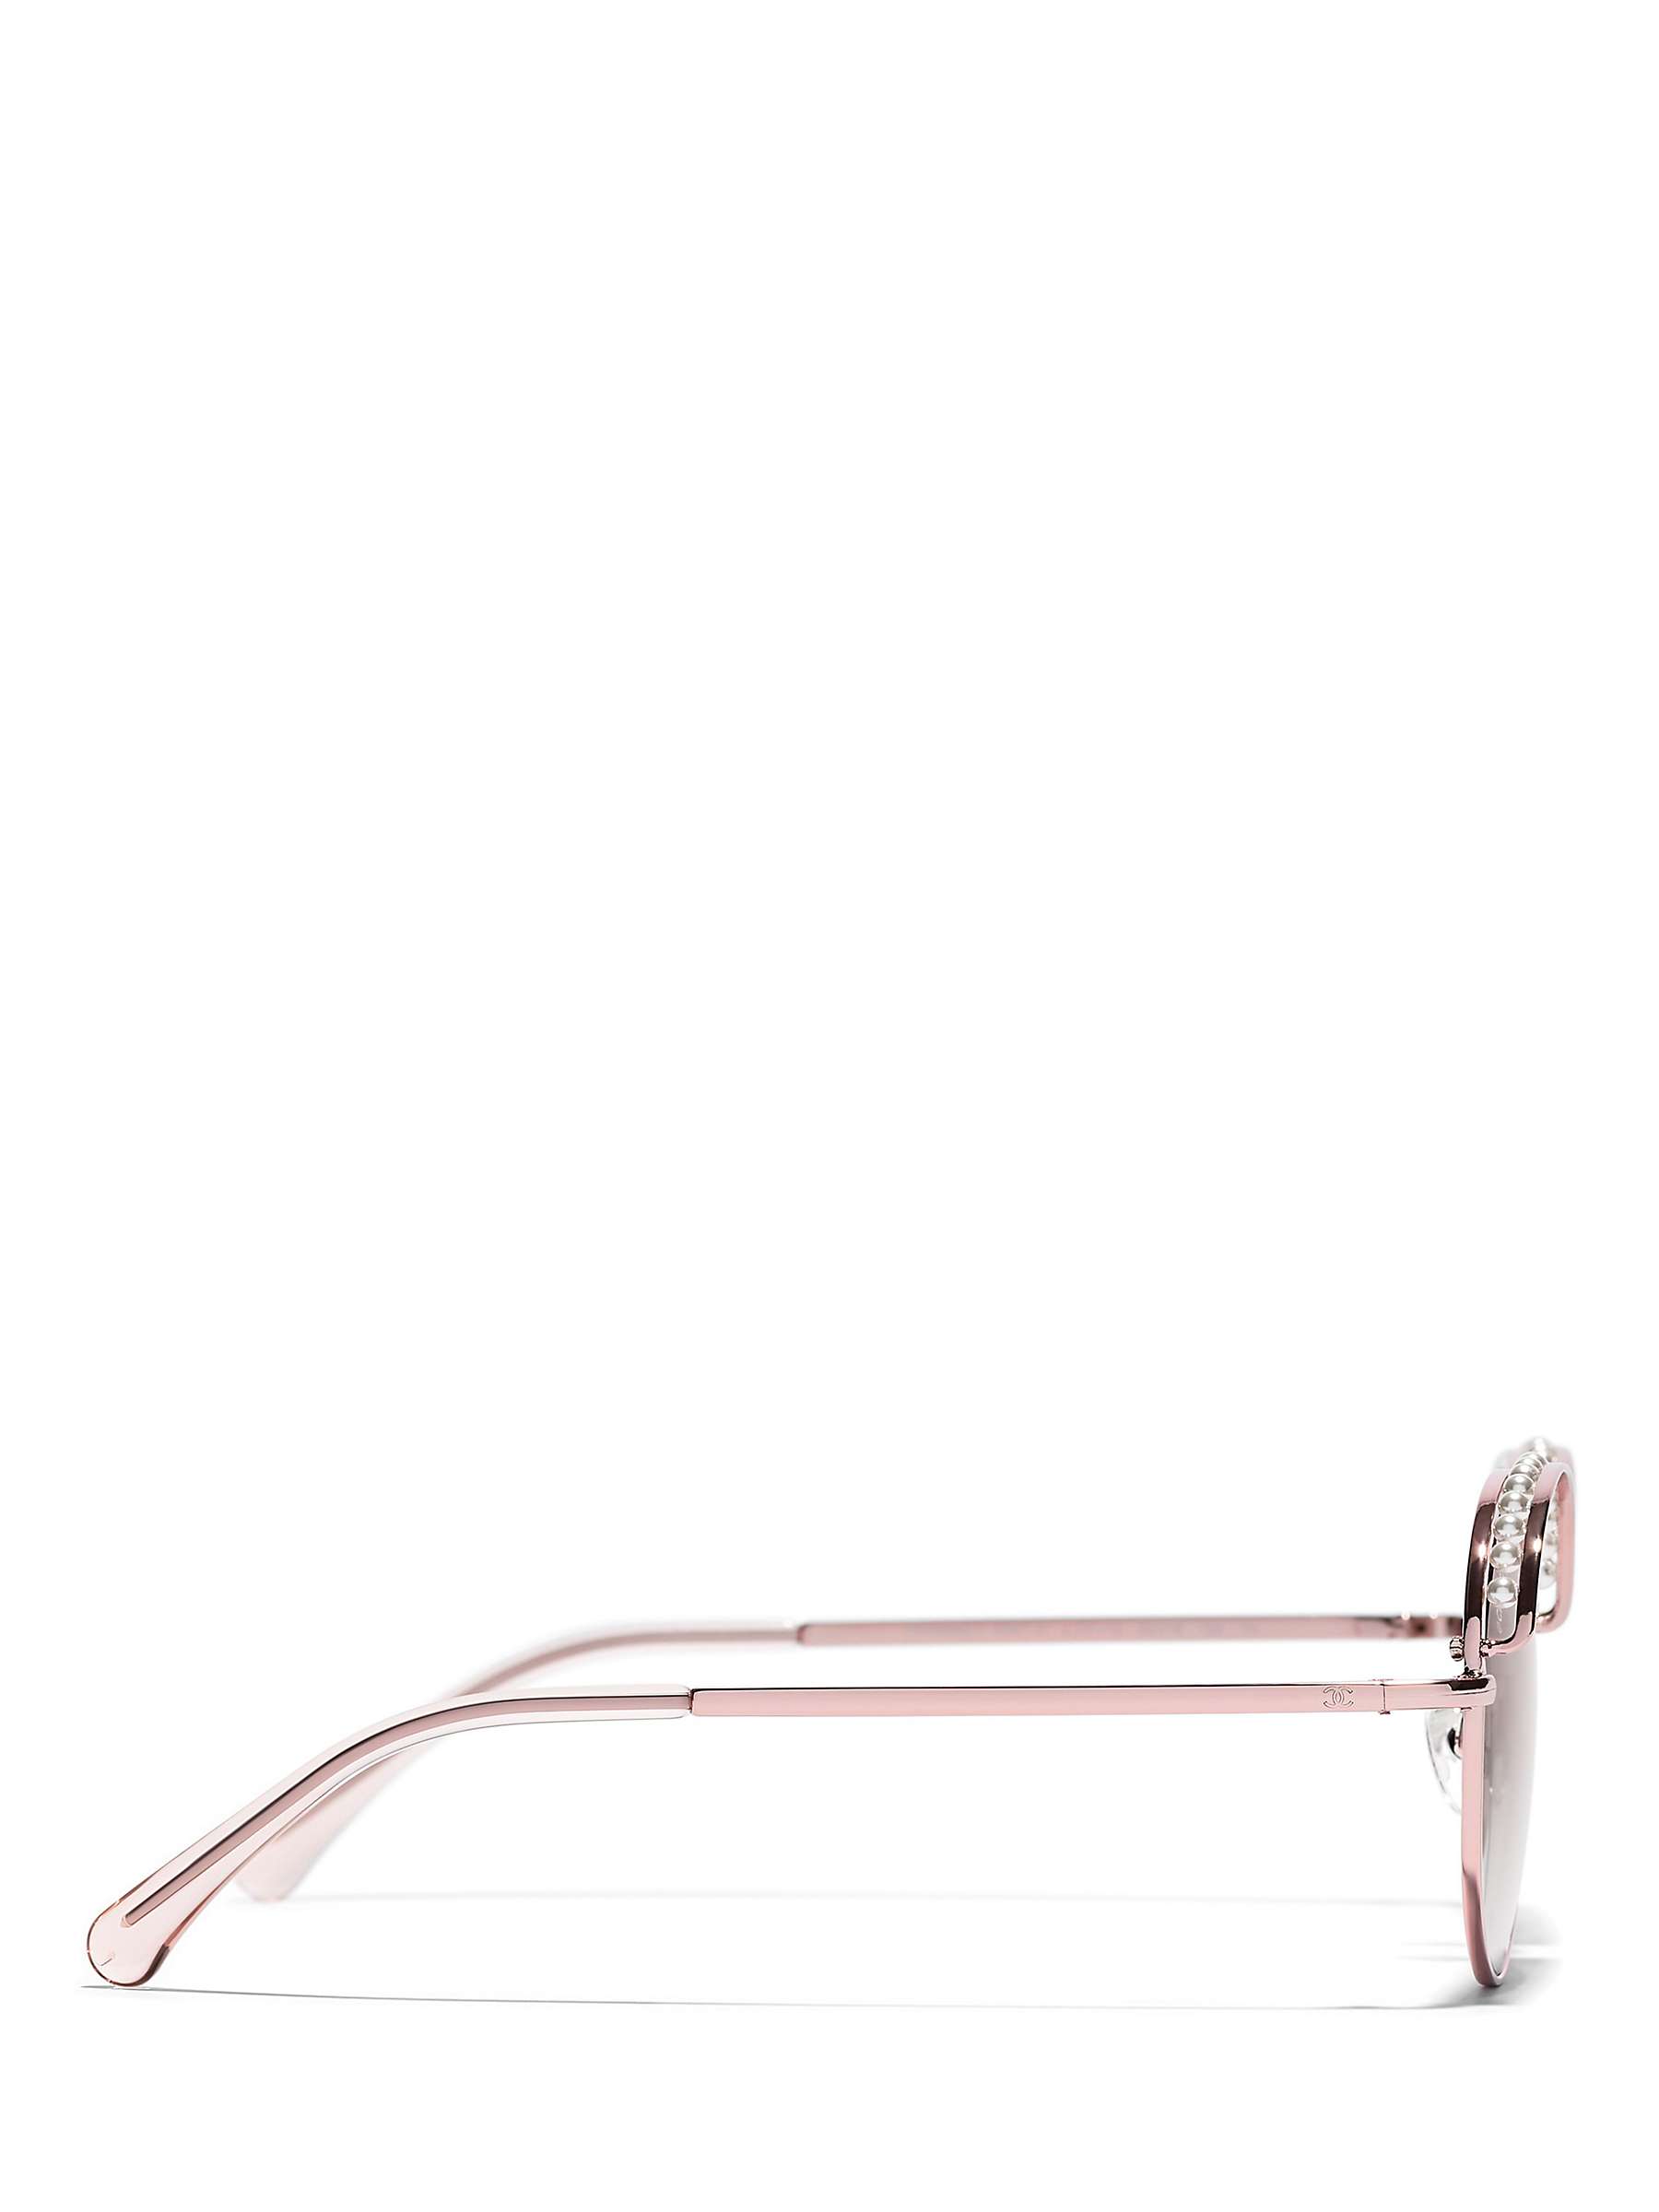 Buy CHANEL Round Sunglasses CH4247H Rose Gold/Blush Gradient Online at johnlewis.com